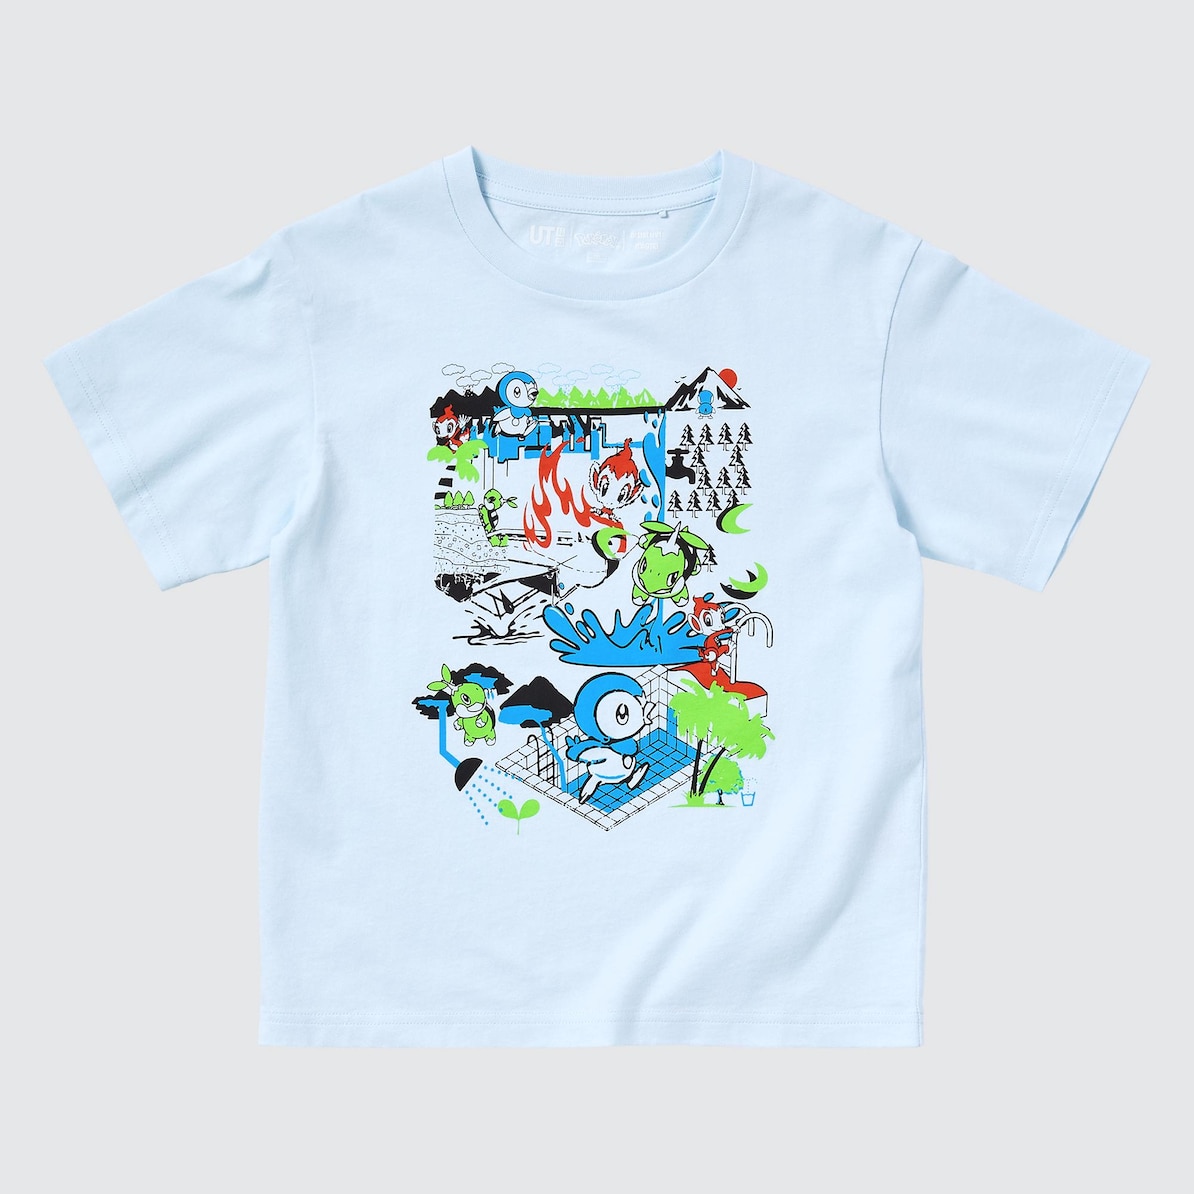 Second series in Uniqlo’s “Pokémon Meets Artist” collection of graphic ...